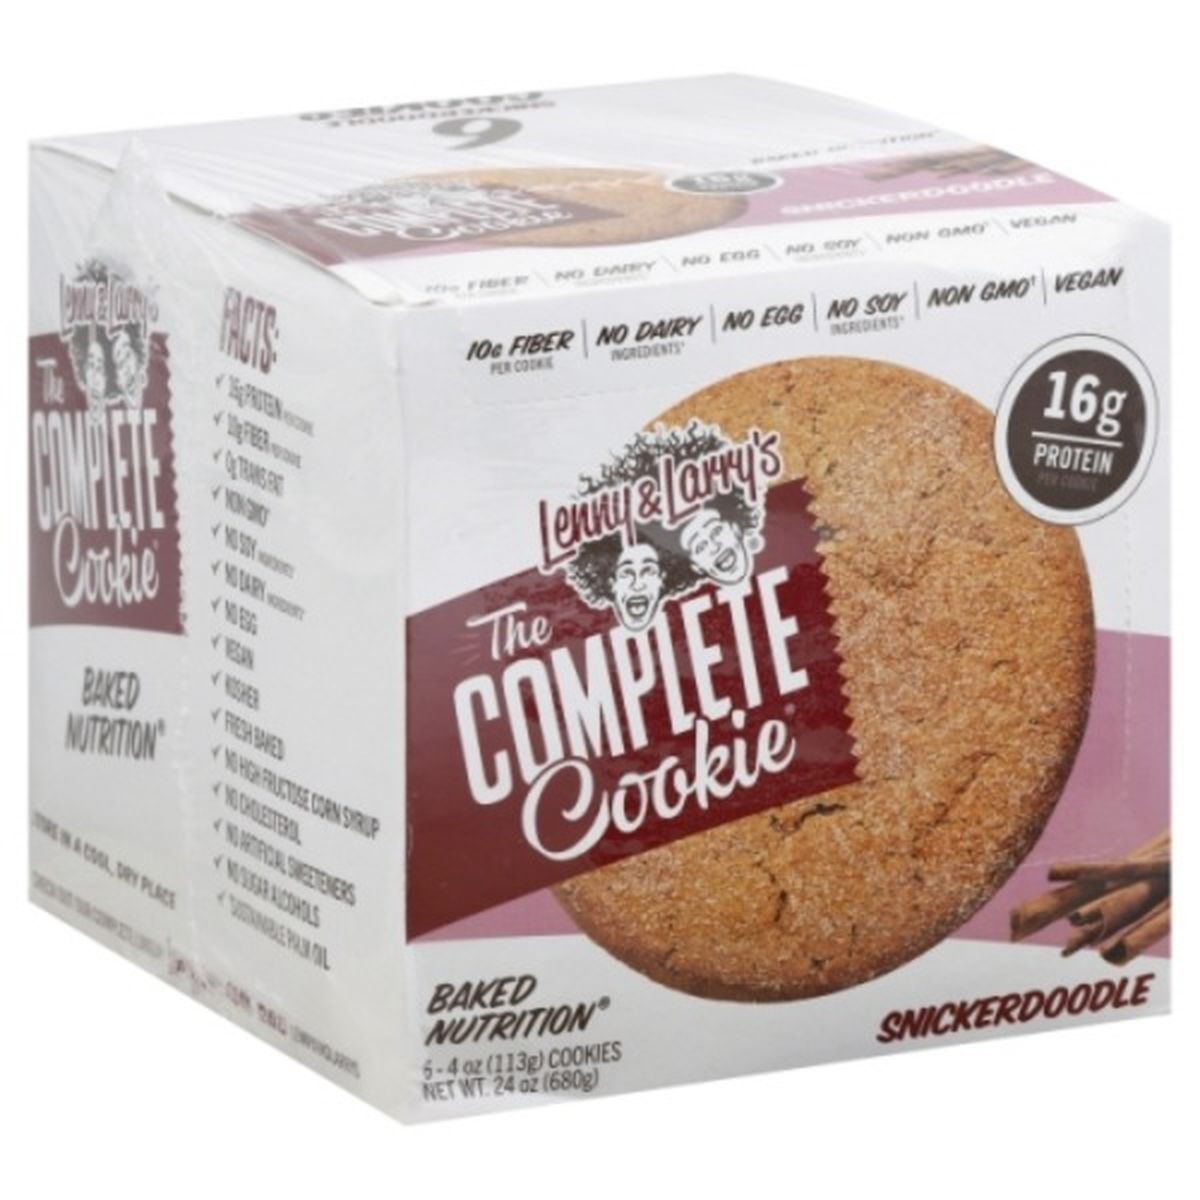 Calories in Lenny & Larry's Cookie, The Complete, Snickerdoodle